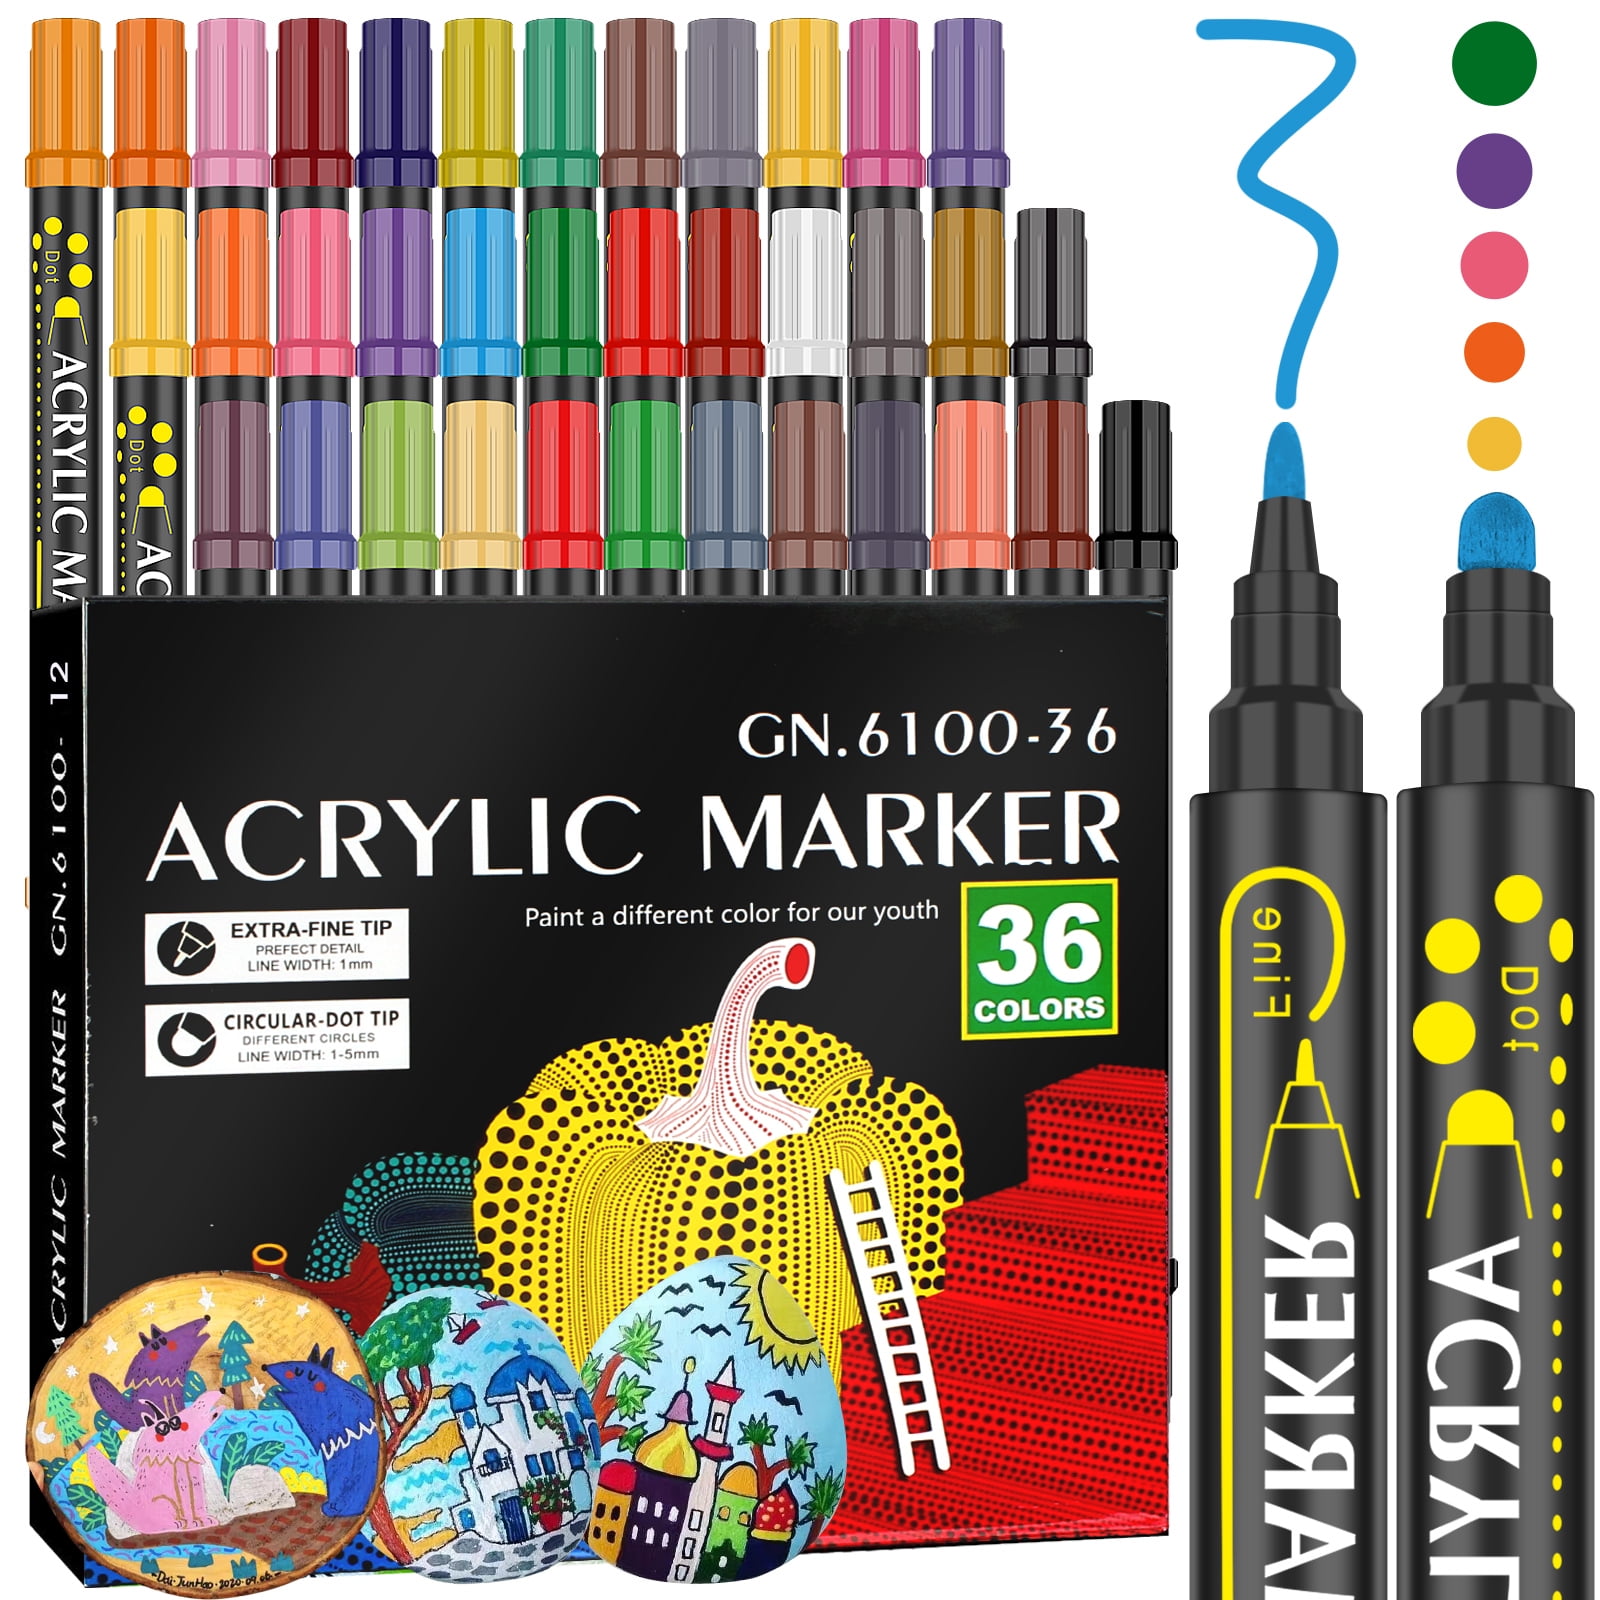 SDJMa Dual Tip Acrylic Markers Pen with Reversible Tip, 12 Colors Brush &  Medium Point & Fine Metallic Paint Pens for Rock, Wood, Fabric, Glass,  Metal, Ceramic, DIY Crafts and Most Surfaces 